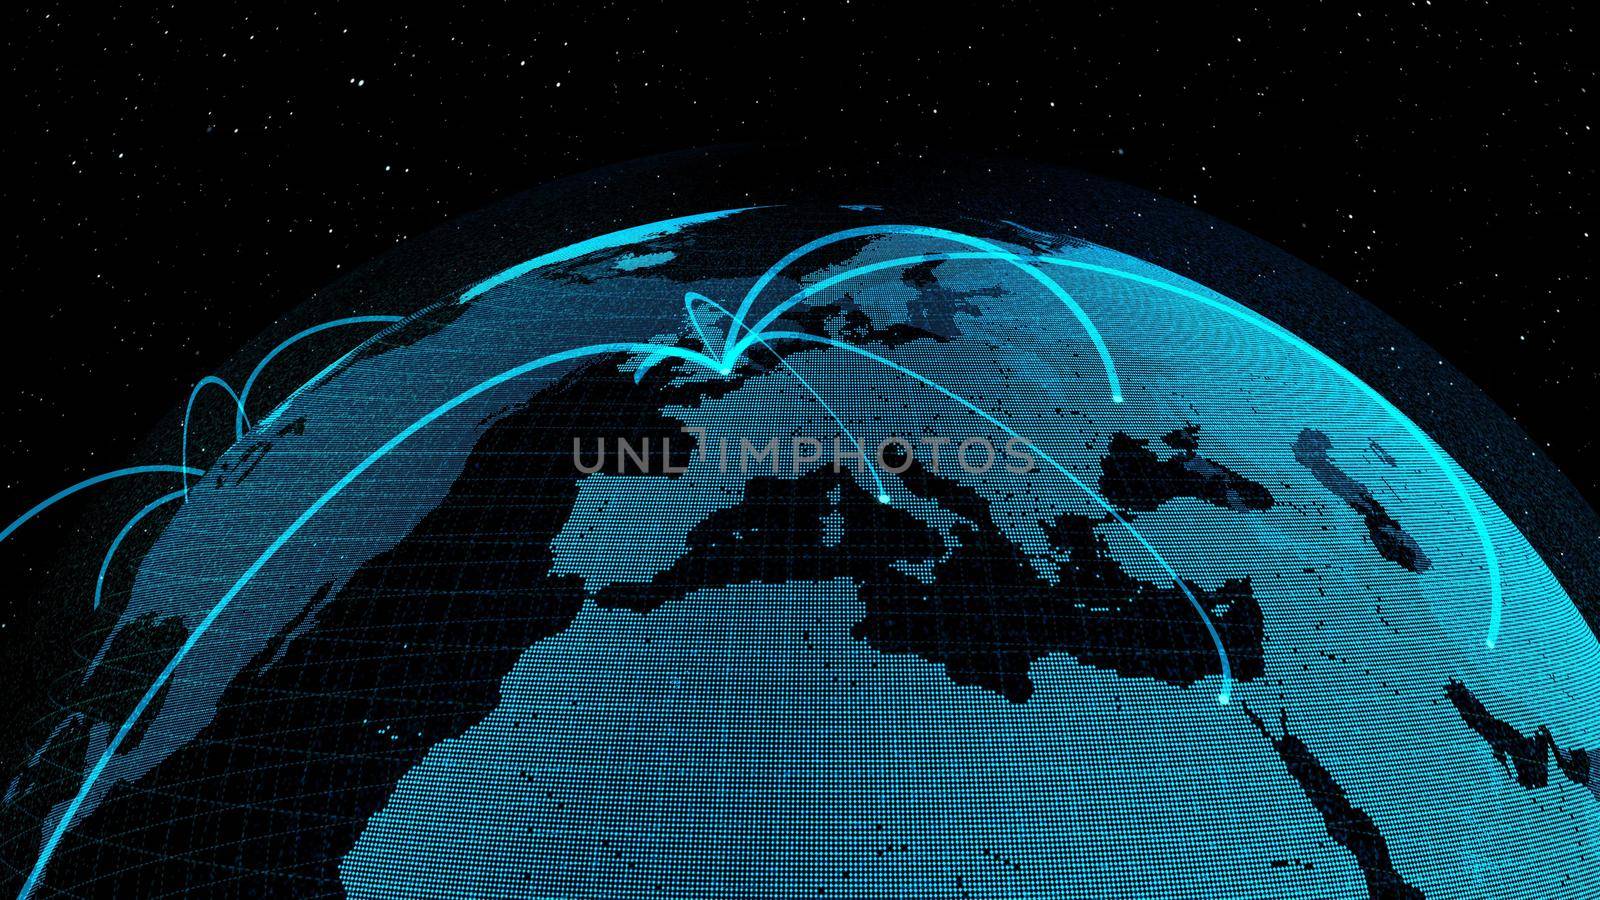 Global network and internet connection in orbital earth globe . Concept of wireless digital connection and internet of things in futuristic 3D rendering graphic .